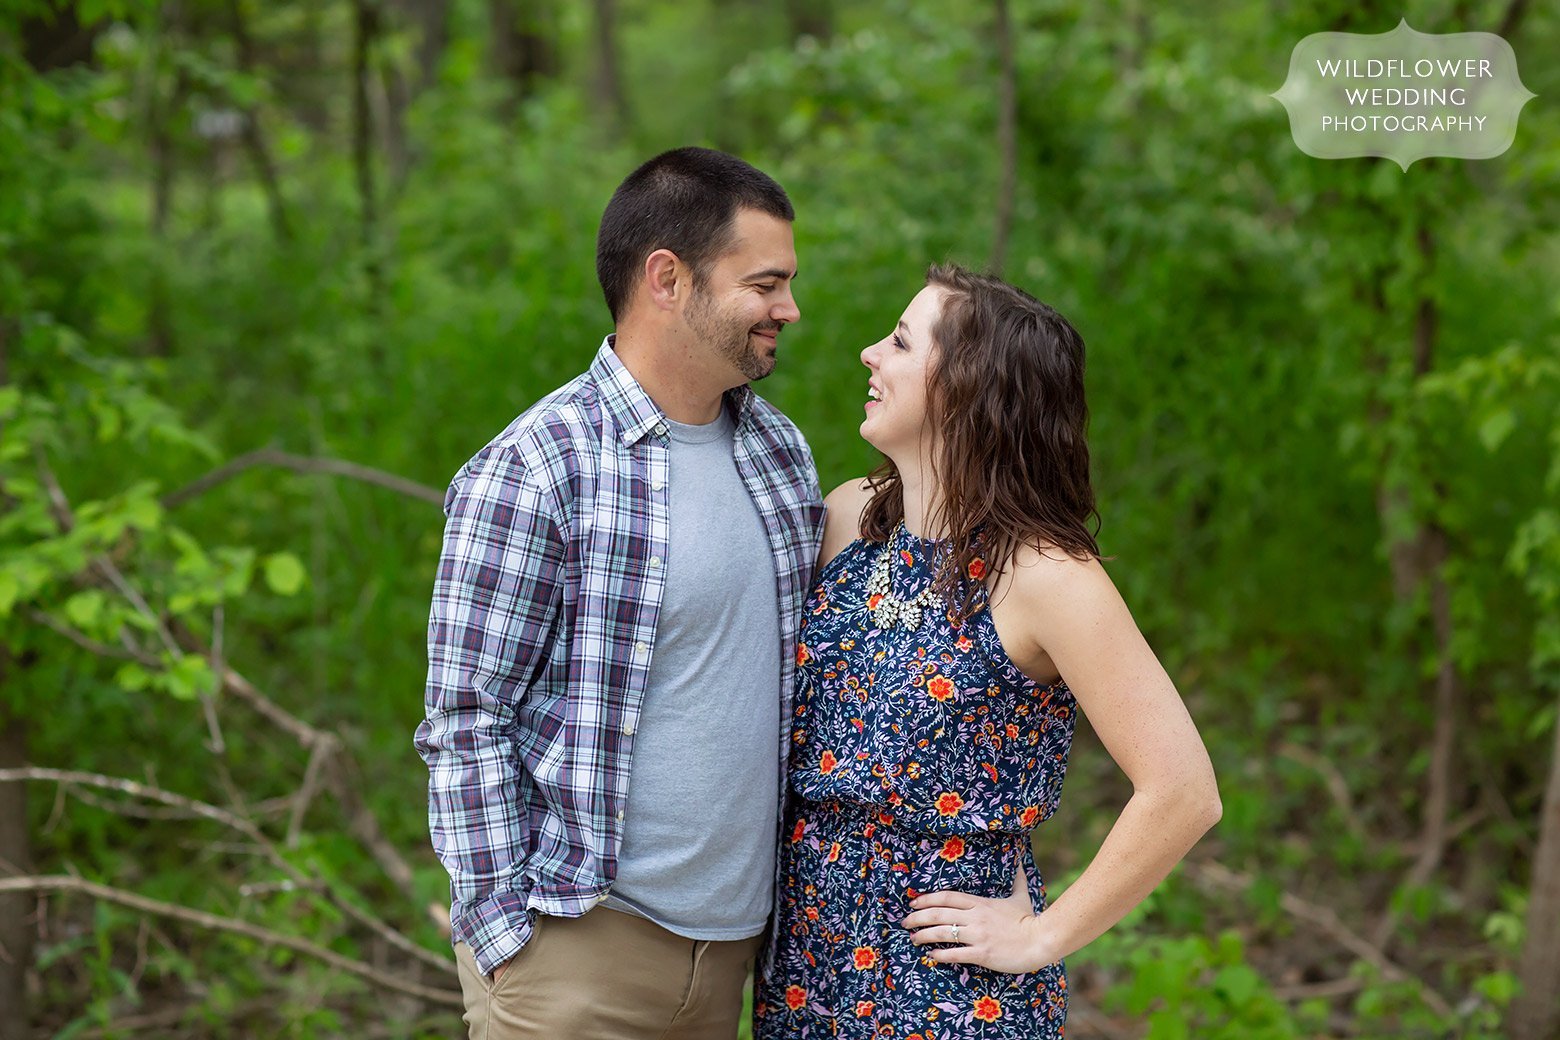 Candid and happy engagement photos in spring.